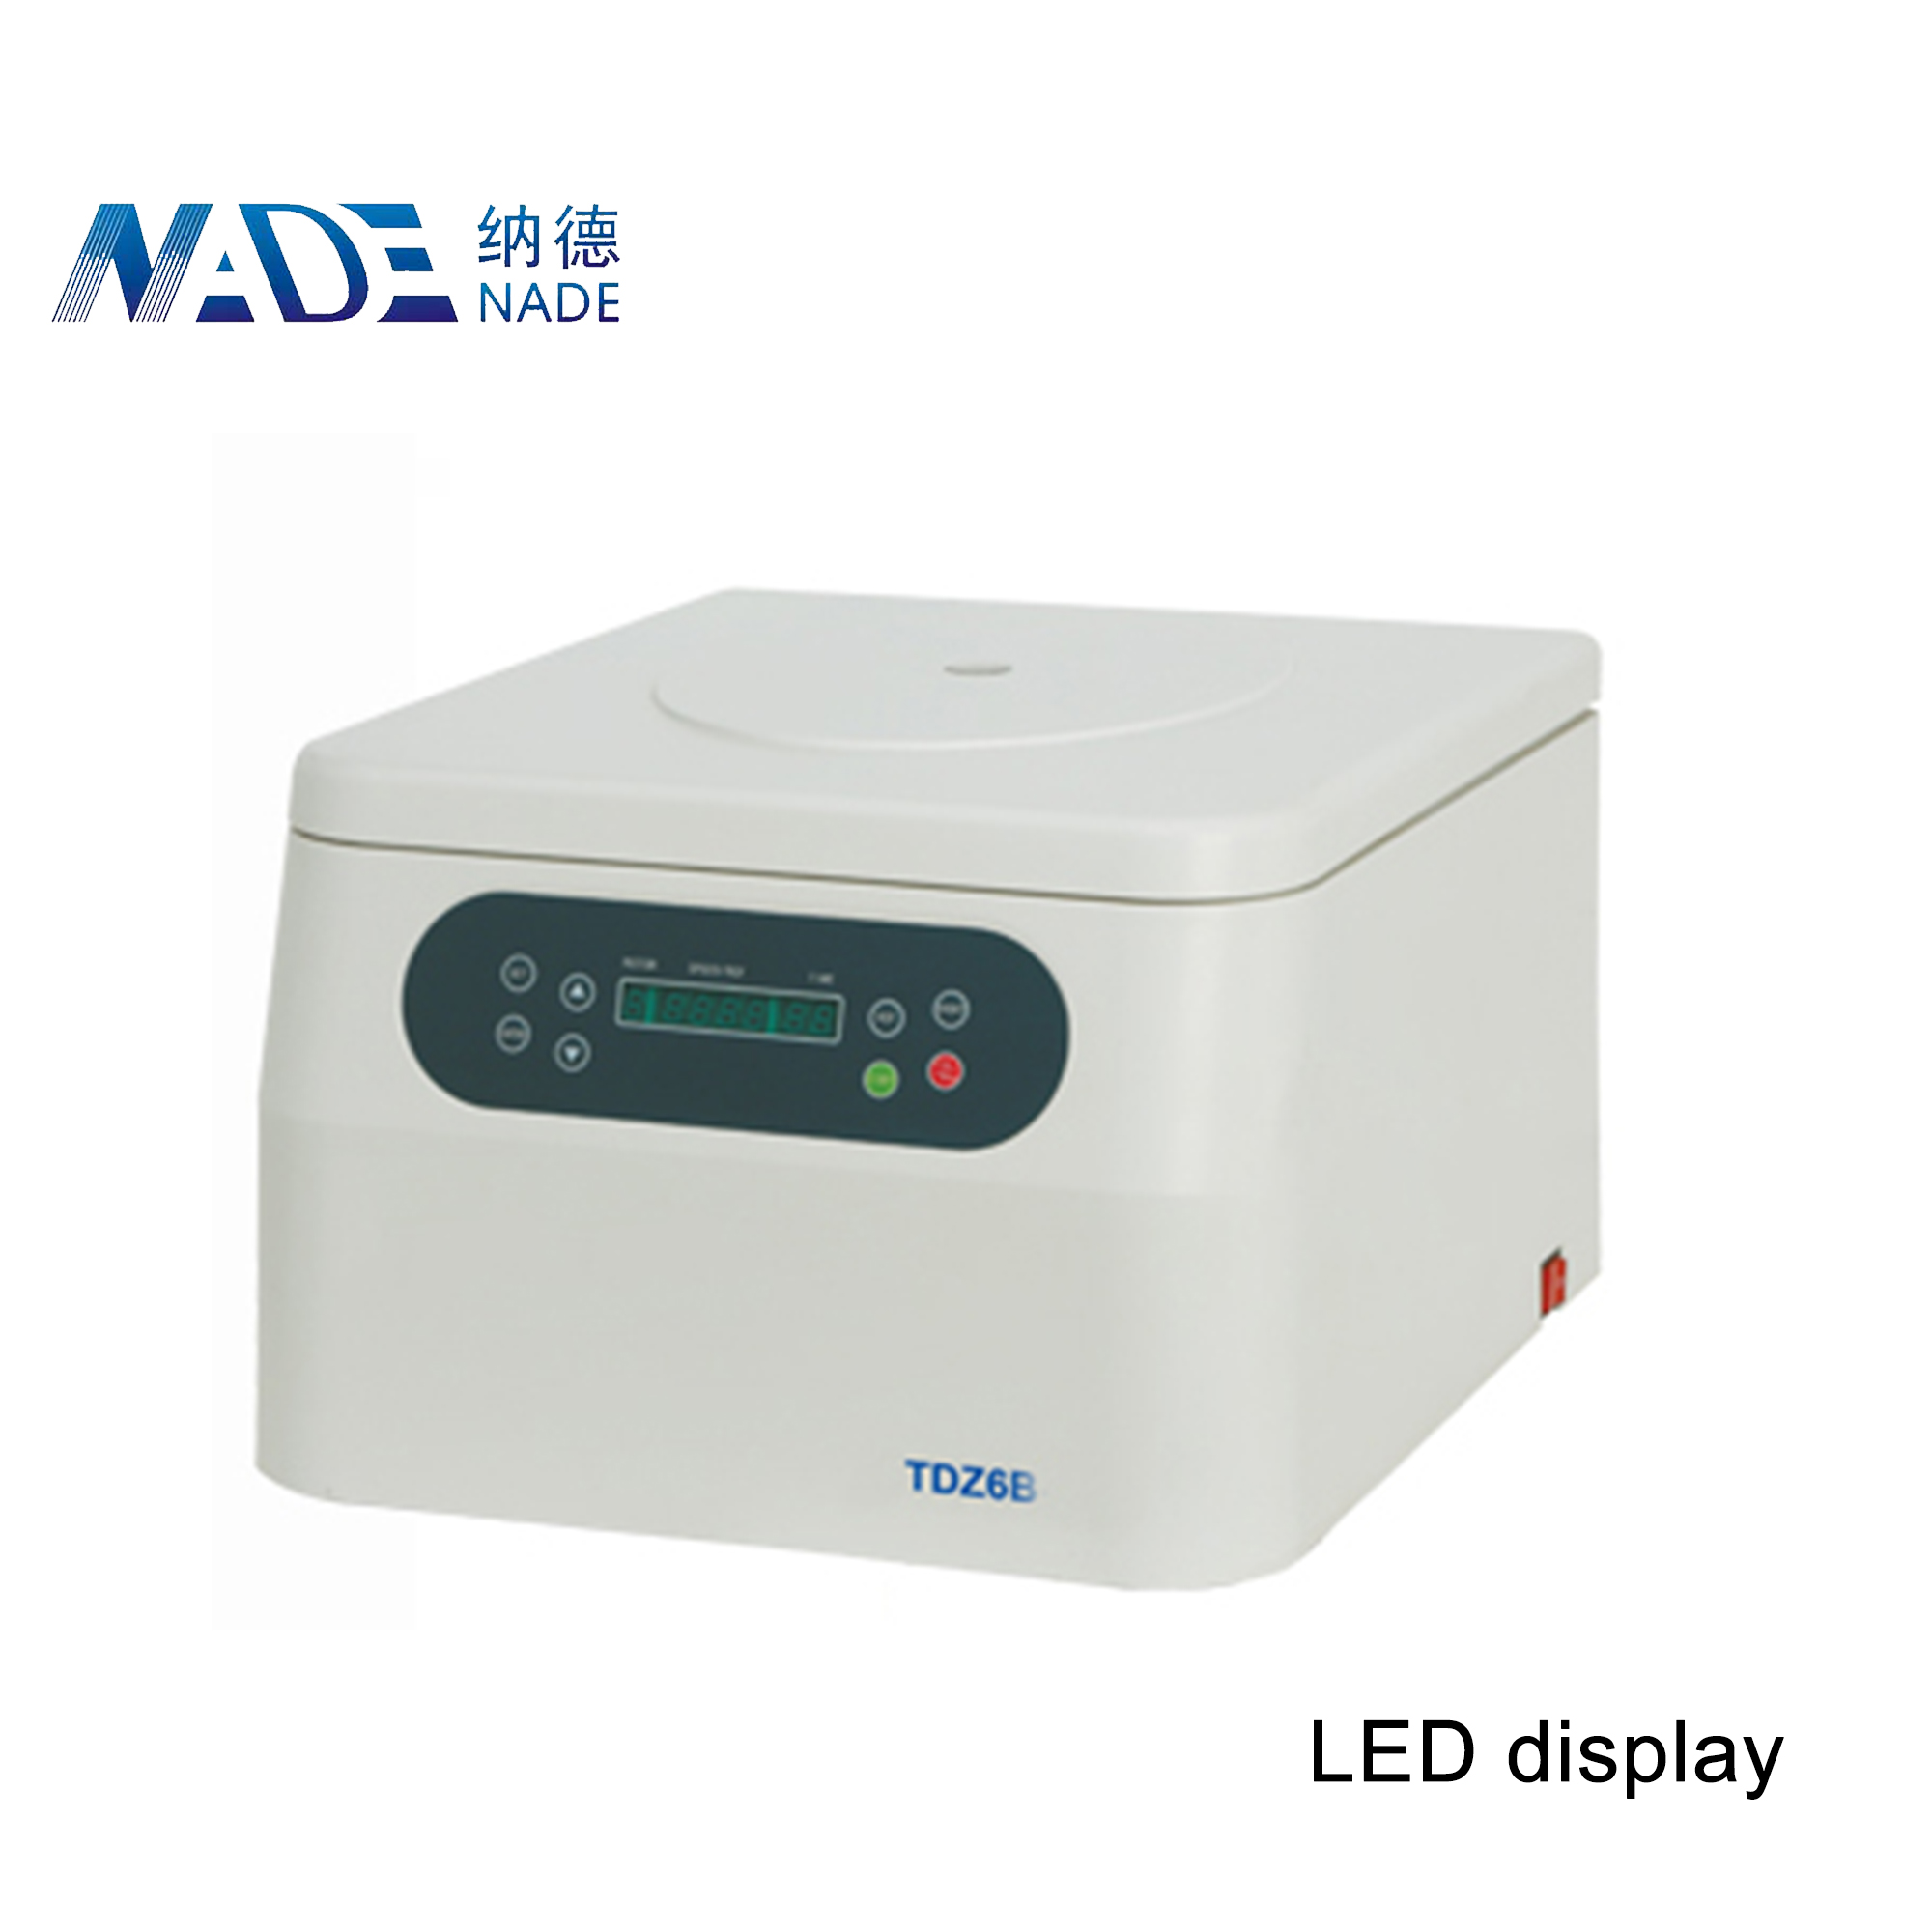 Nade TD6B Tabletop Low Speed Centrifuge 6000r/min used in clinical medicine, biochemistry, genetic engineering, immunology,etc